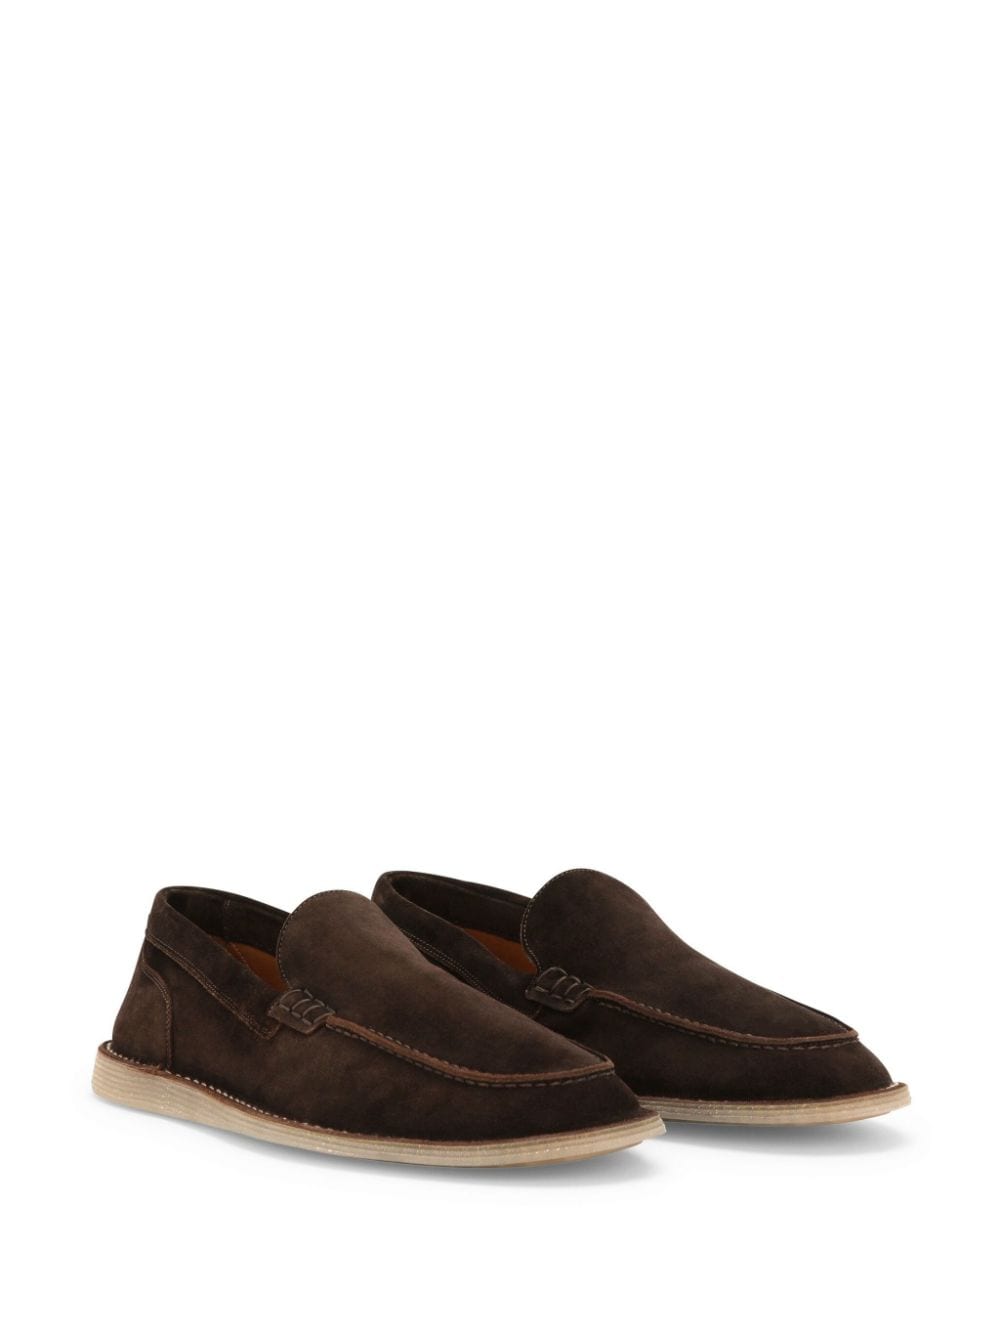 Dolce & Gabbana DOLCE & GABBANA- Suede Leather Loafers